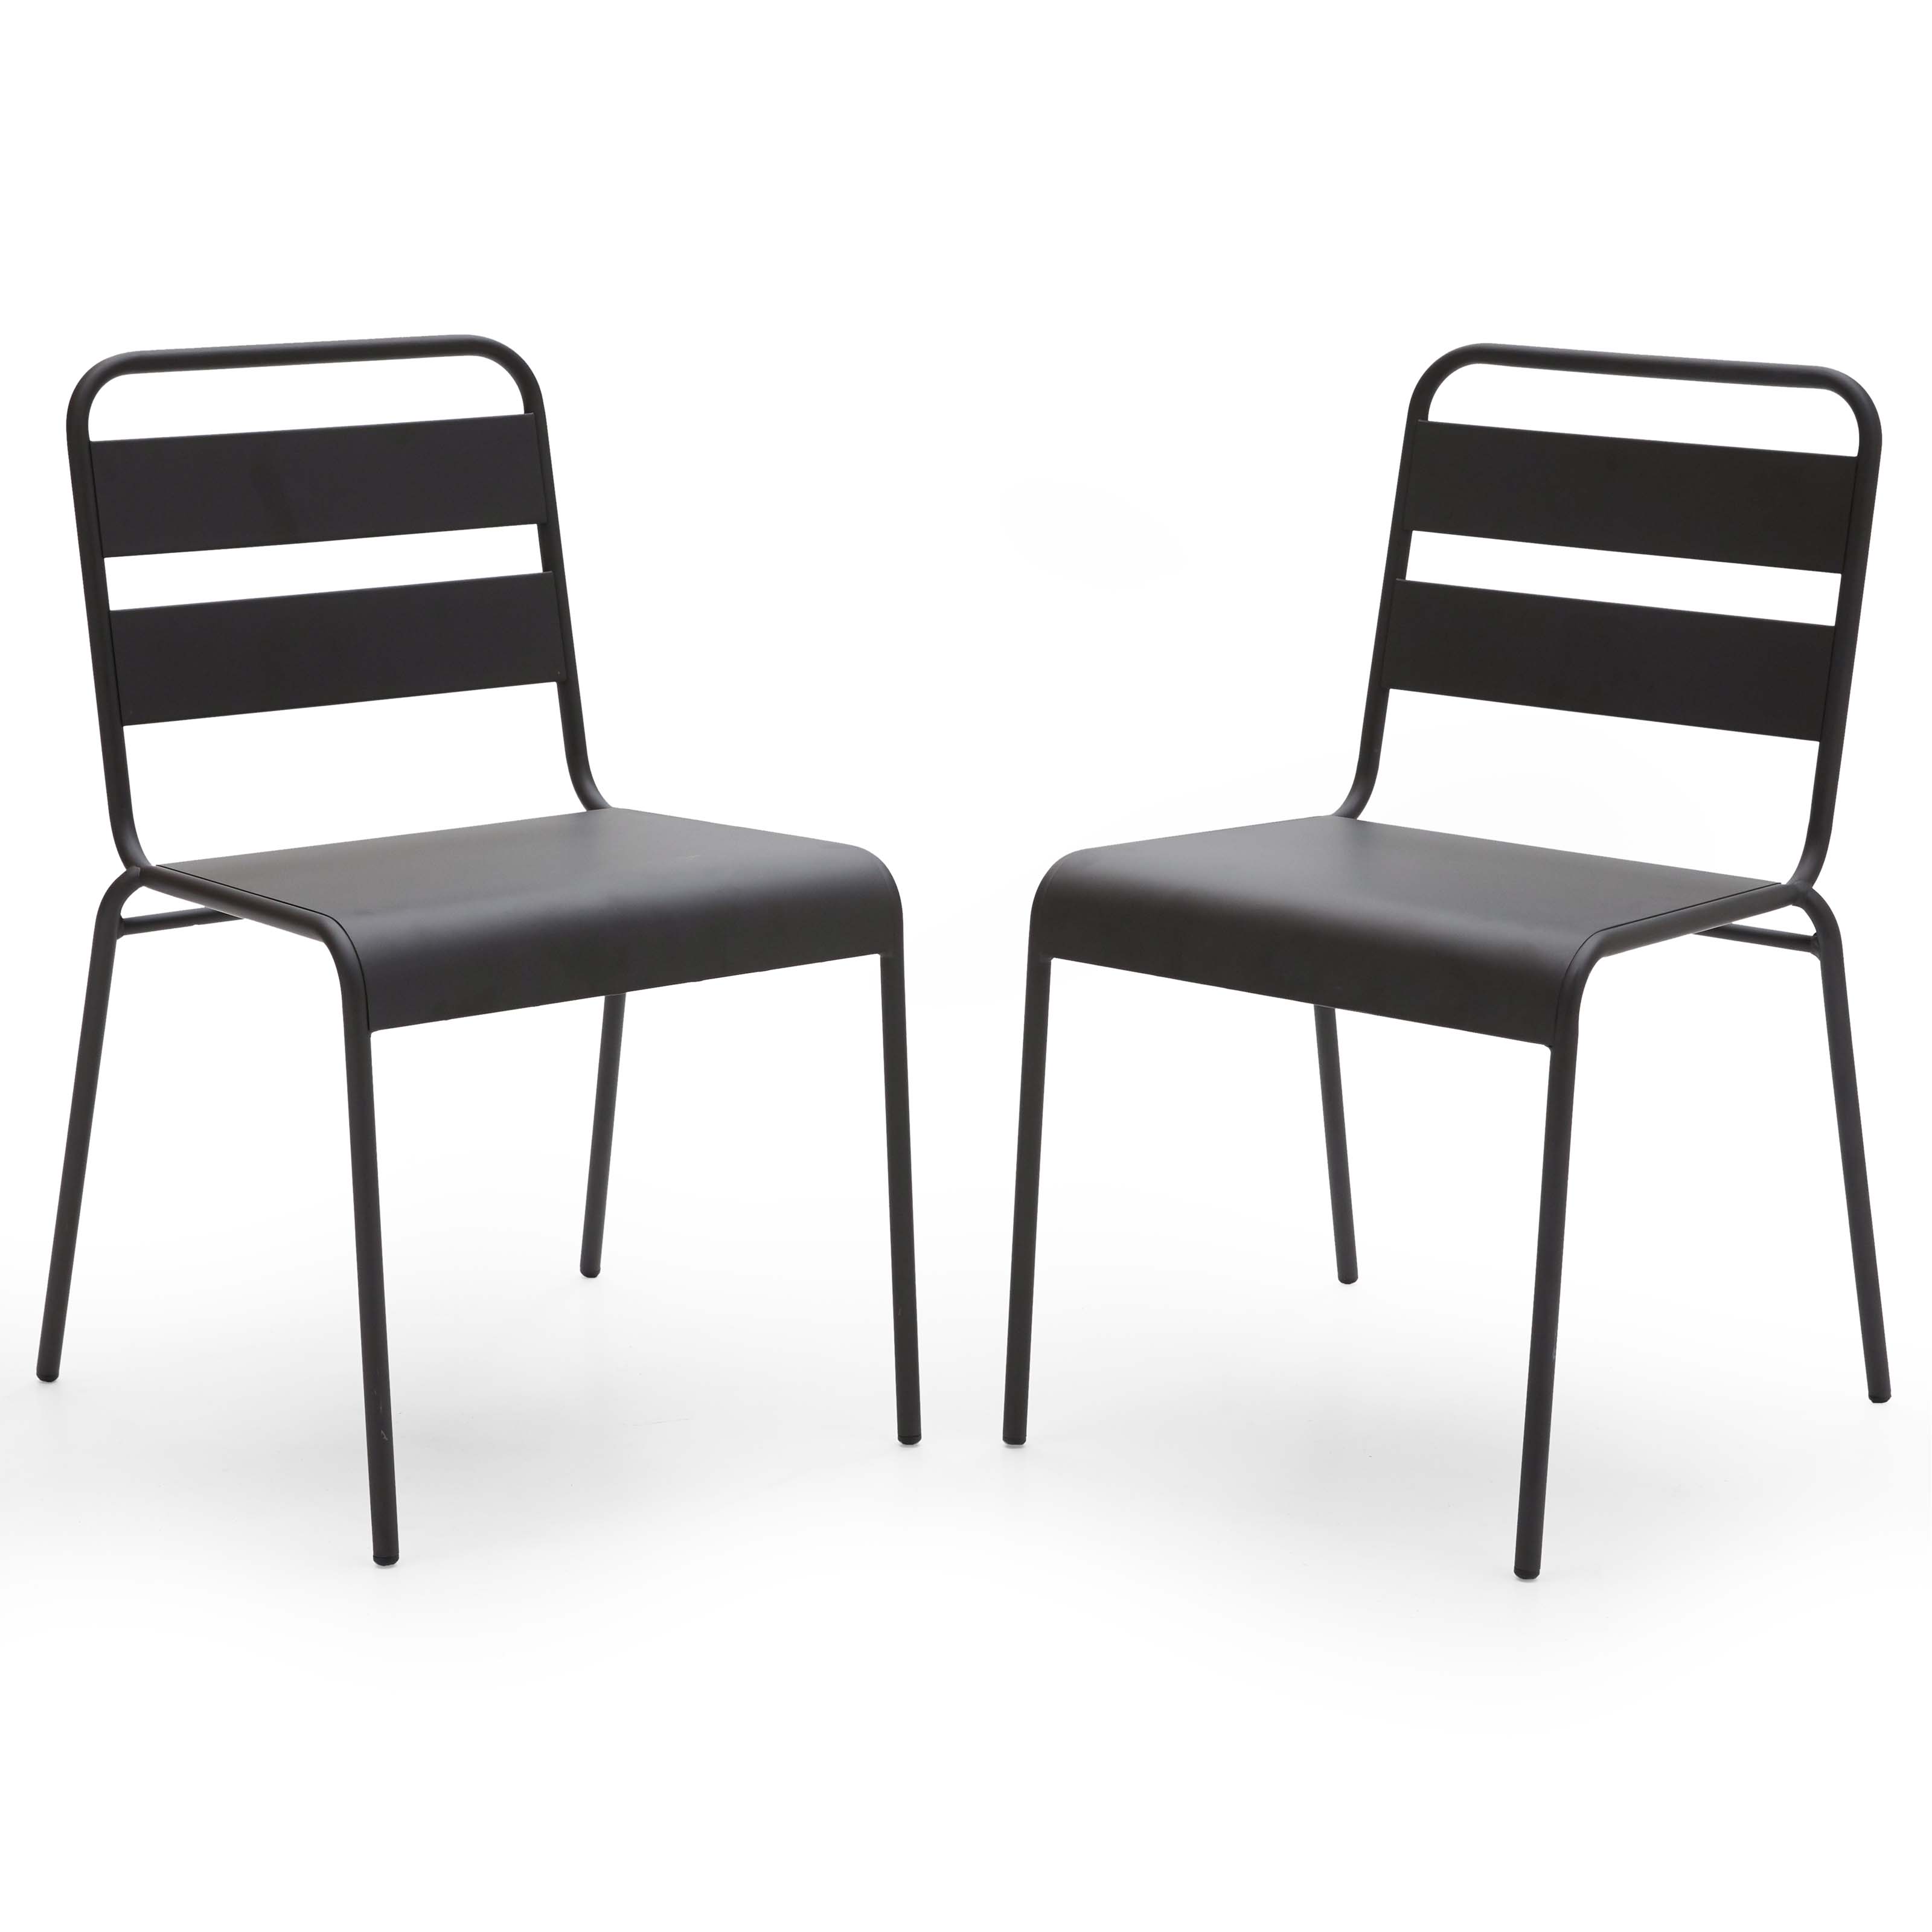 MoDRN Metal Stacking Dining Chairs, Set of 2 - image 1 of 16